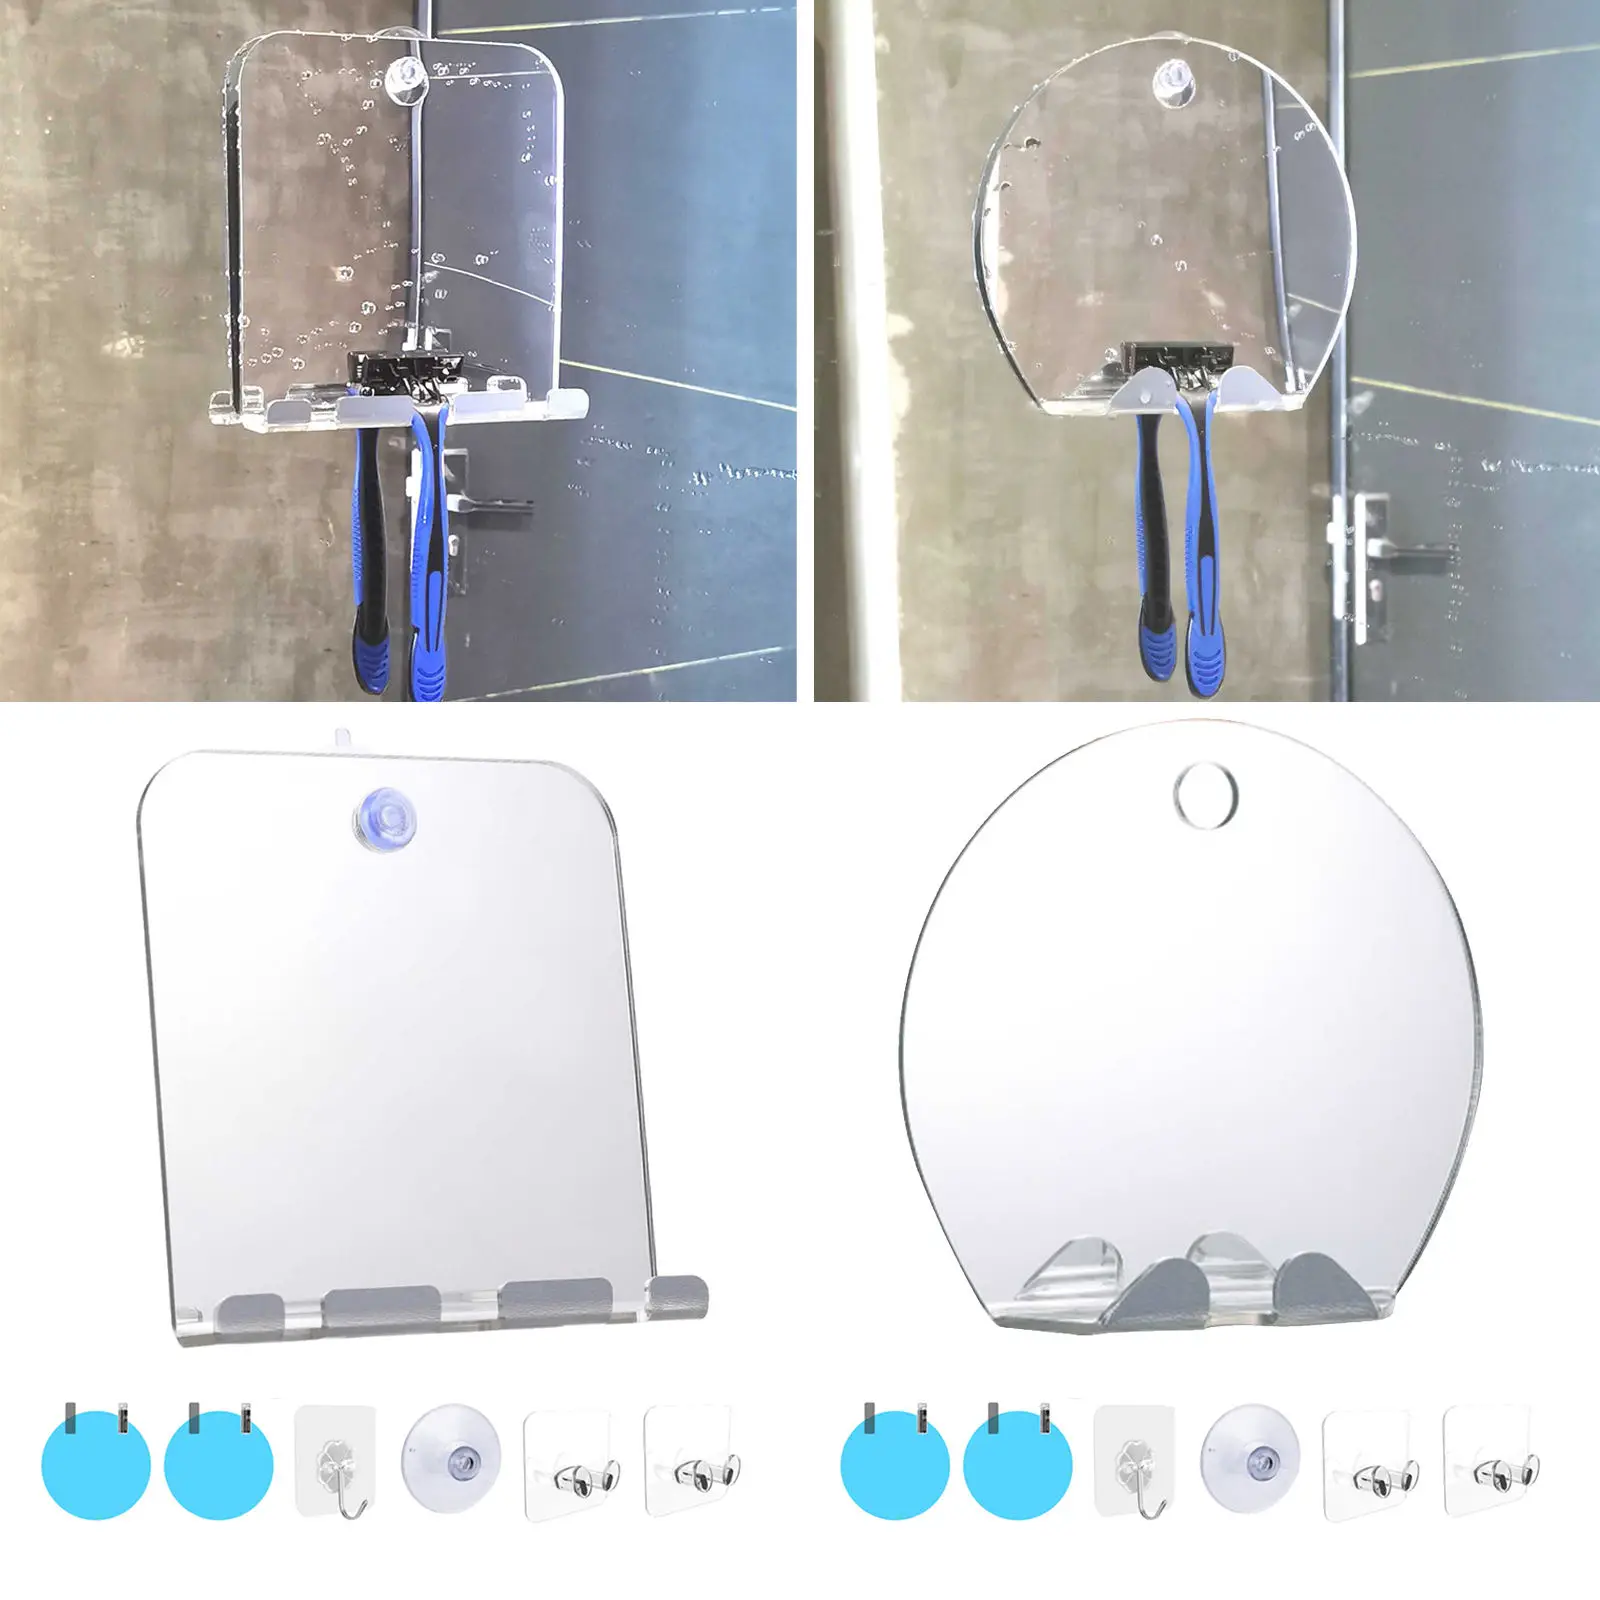 Portable Fogless Shower Shaving Makeup Mirror, with Suction Cup Wall Hanging, Travel Bathroom Anti Fog Mirror